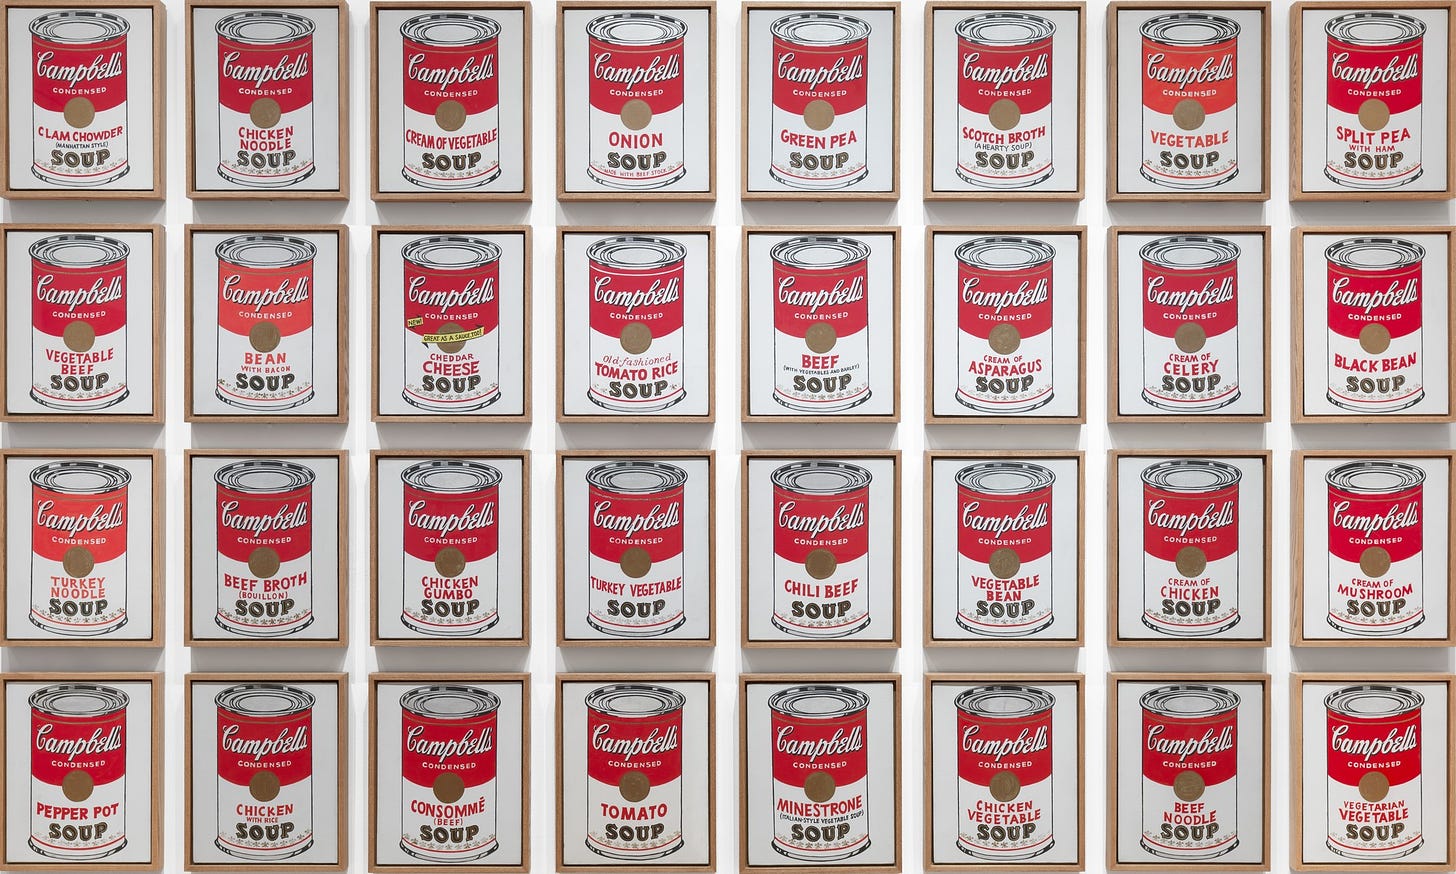 Andy Warhol's Campbell's Soup Cans, 1962 | Origins